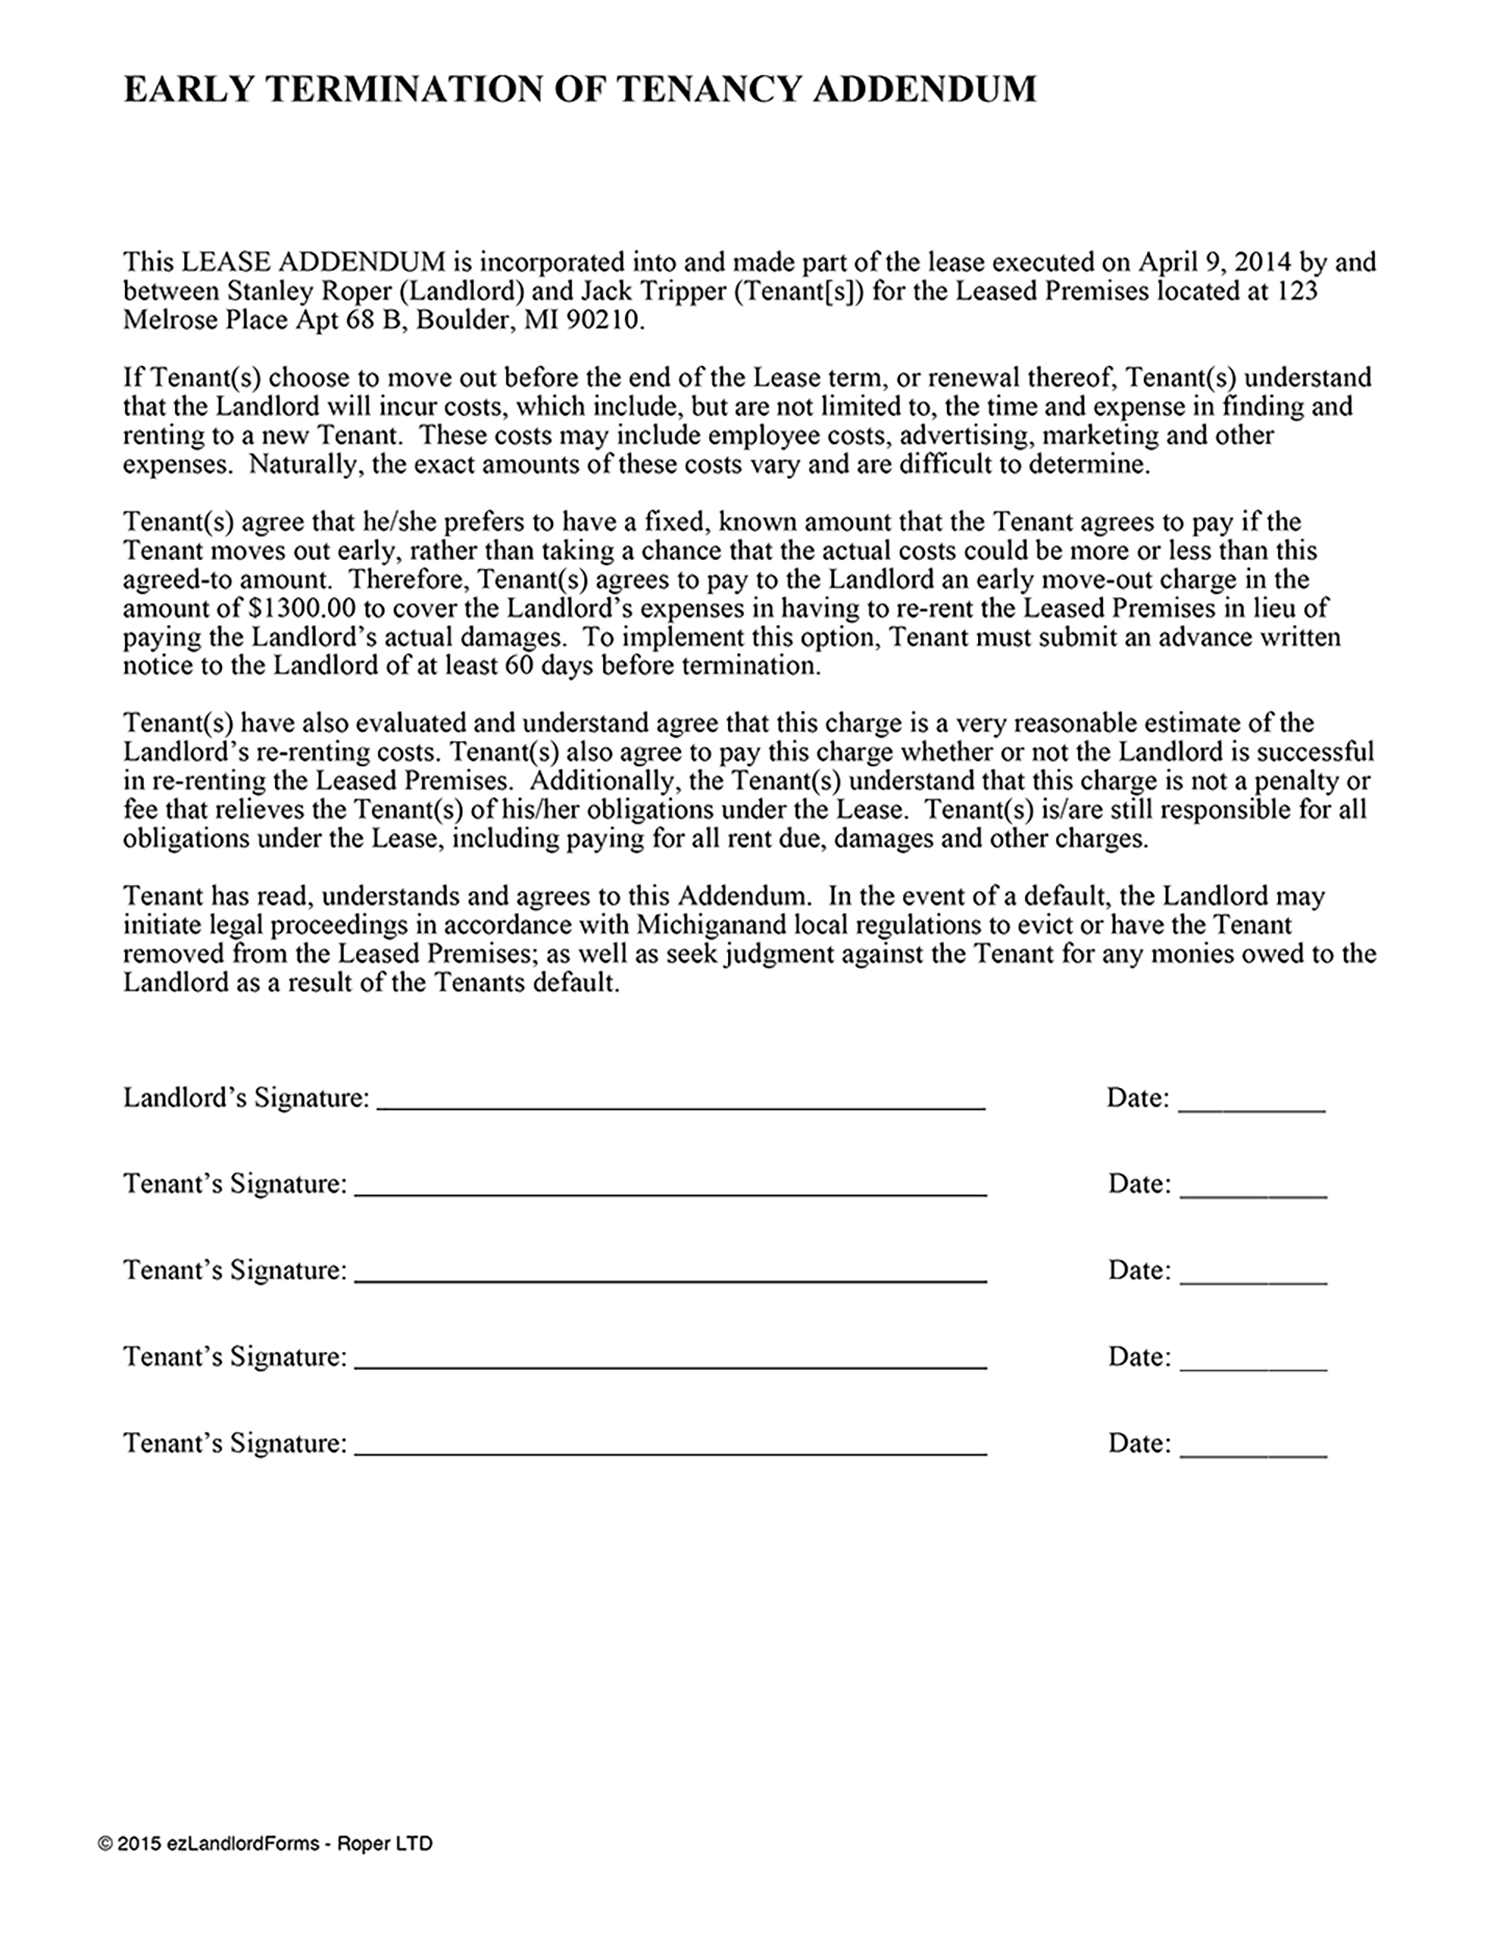 Termination Of Lease Agreement Early Lease Termination Addendum Ezlandlordforms